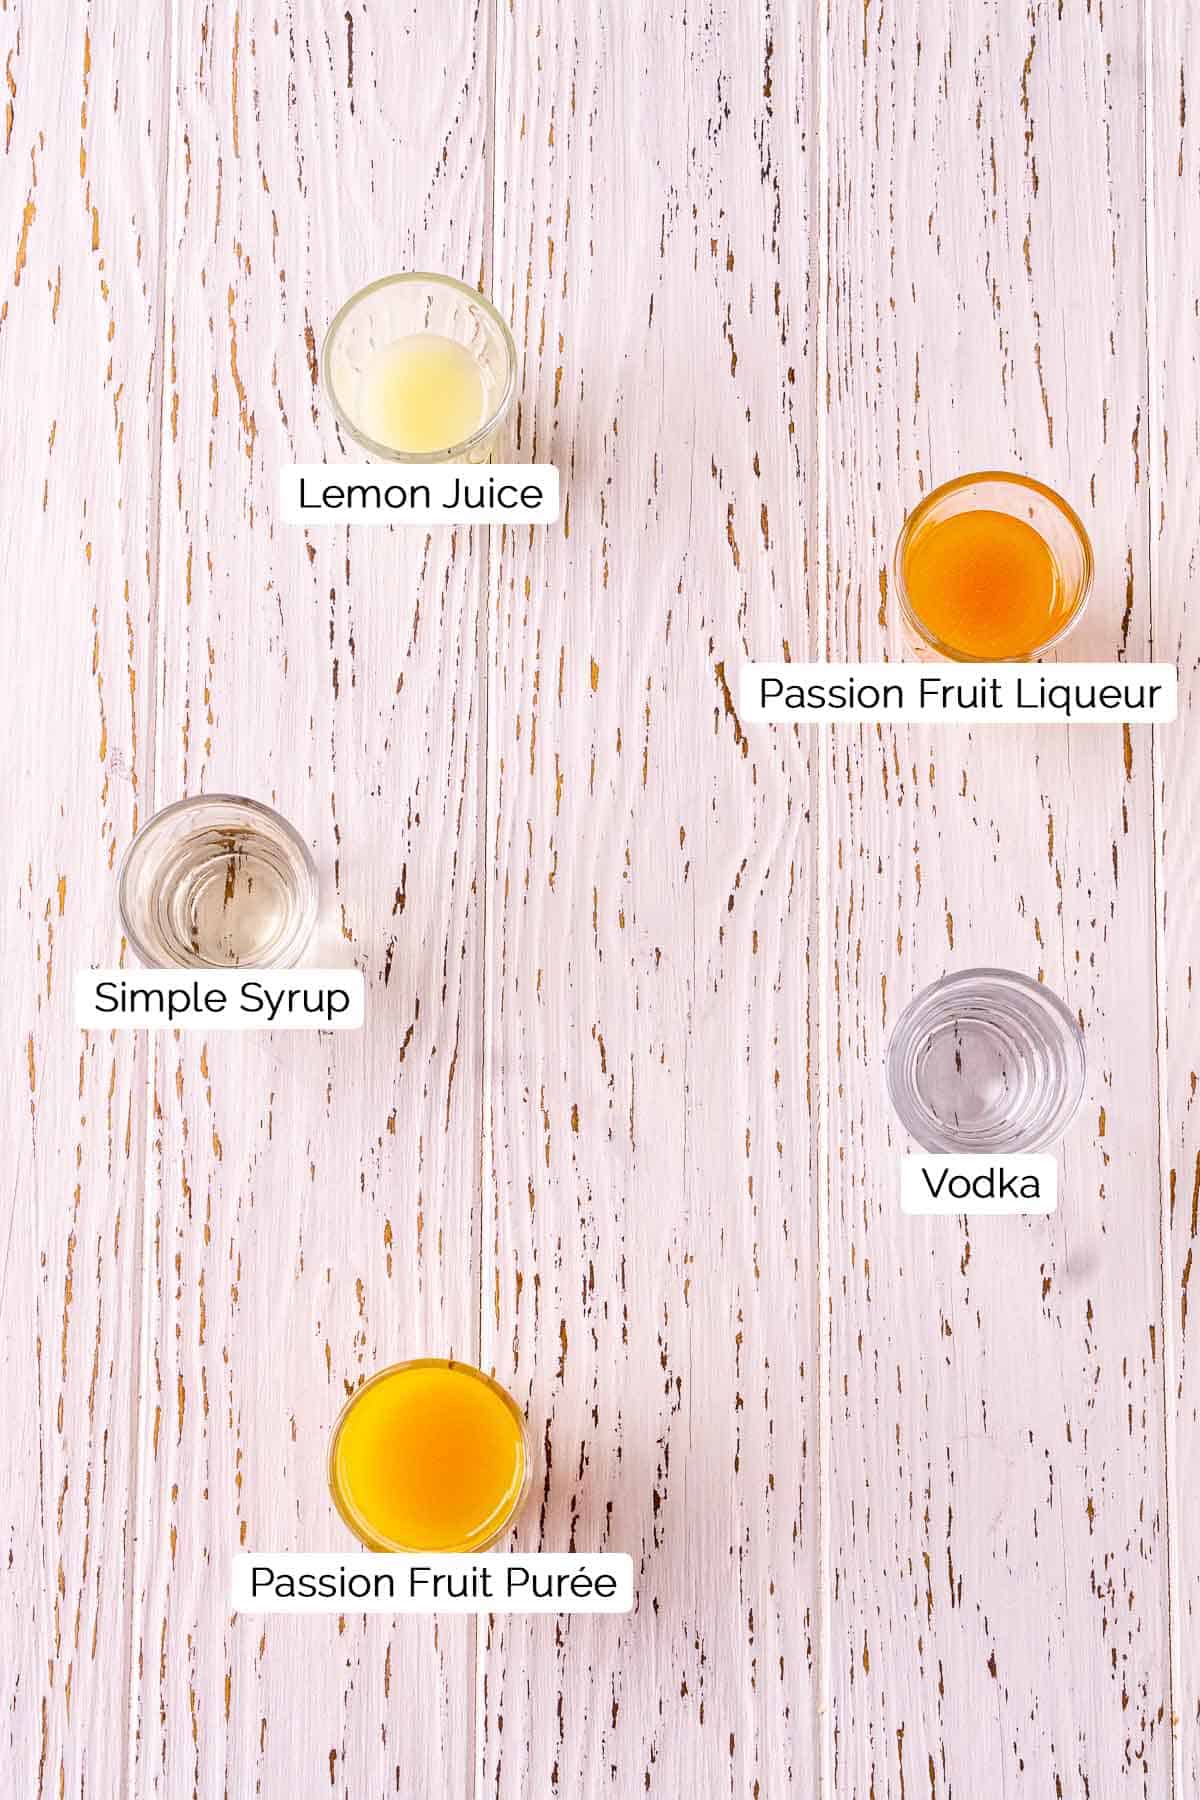 The ingredients in shot glasses on a white wooden board with black and white labels underneath each item.